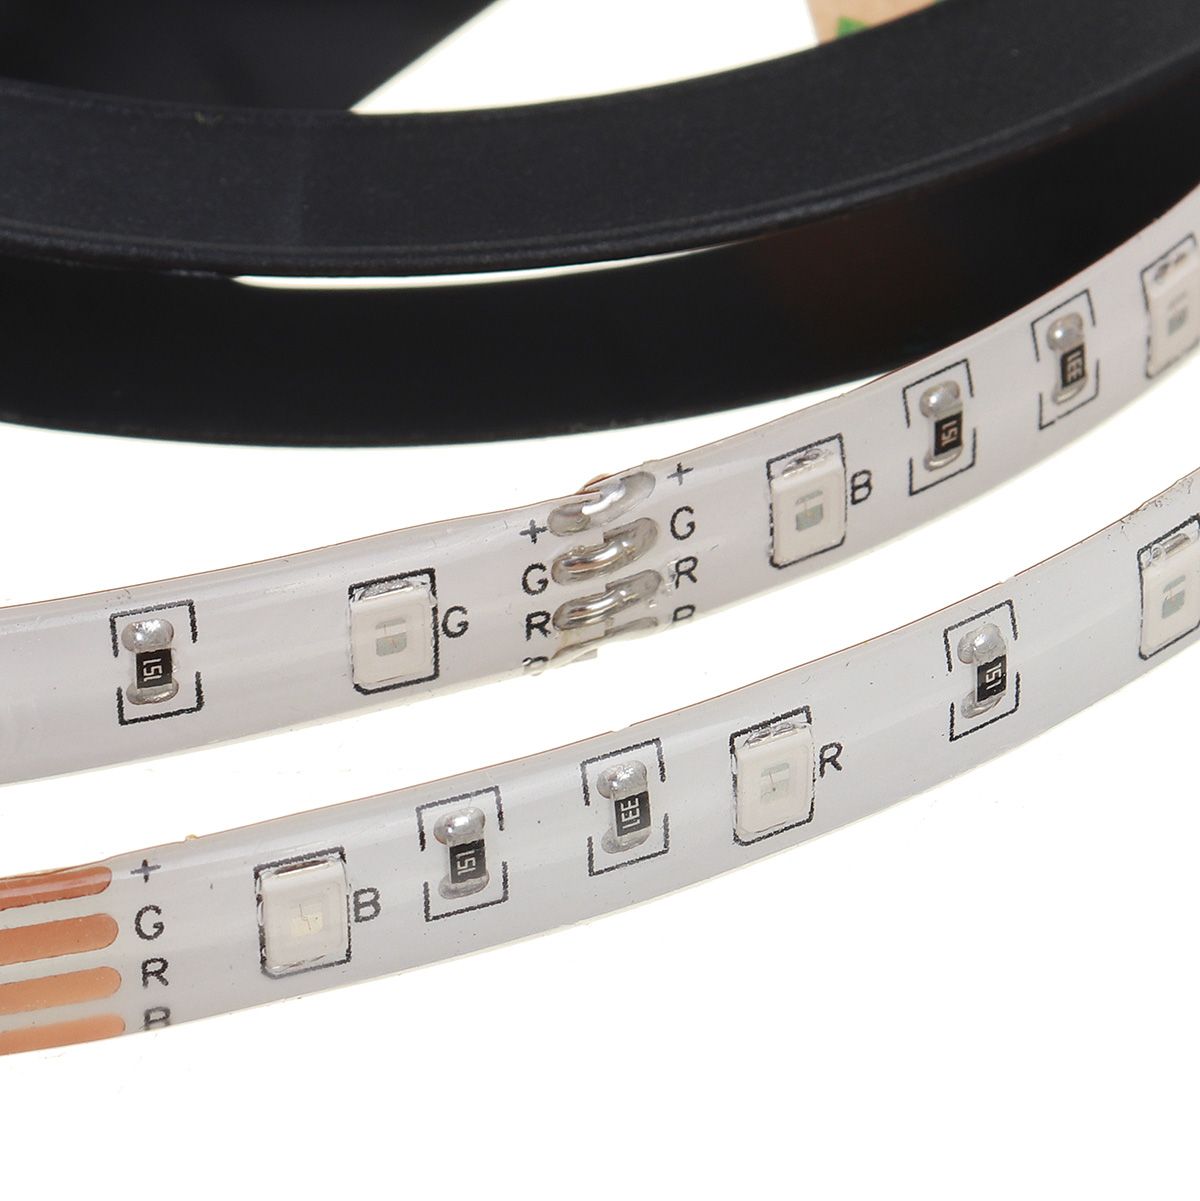 05m1m2m3m-RGB-LED-Lamp-2835-SMD-Light-Bar-Hotel-TV-Backlight-String-Light-Waterproof-with-Control-Re-1712868